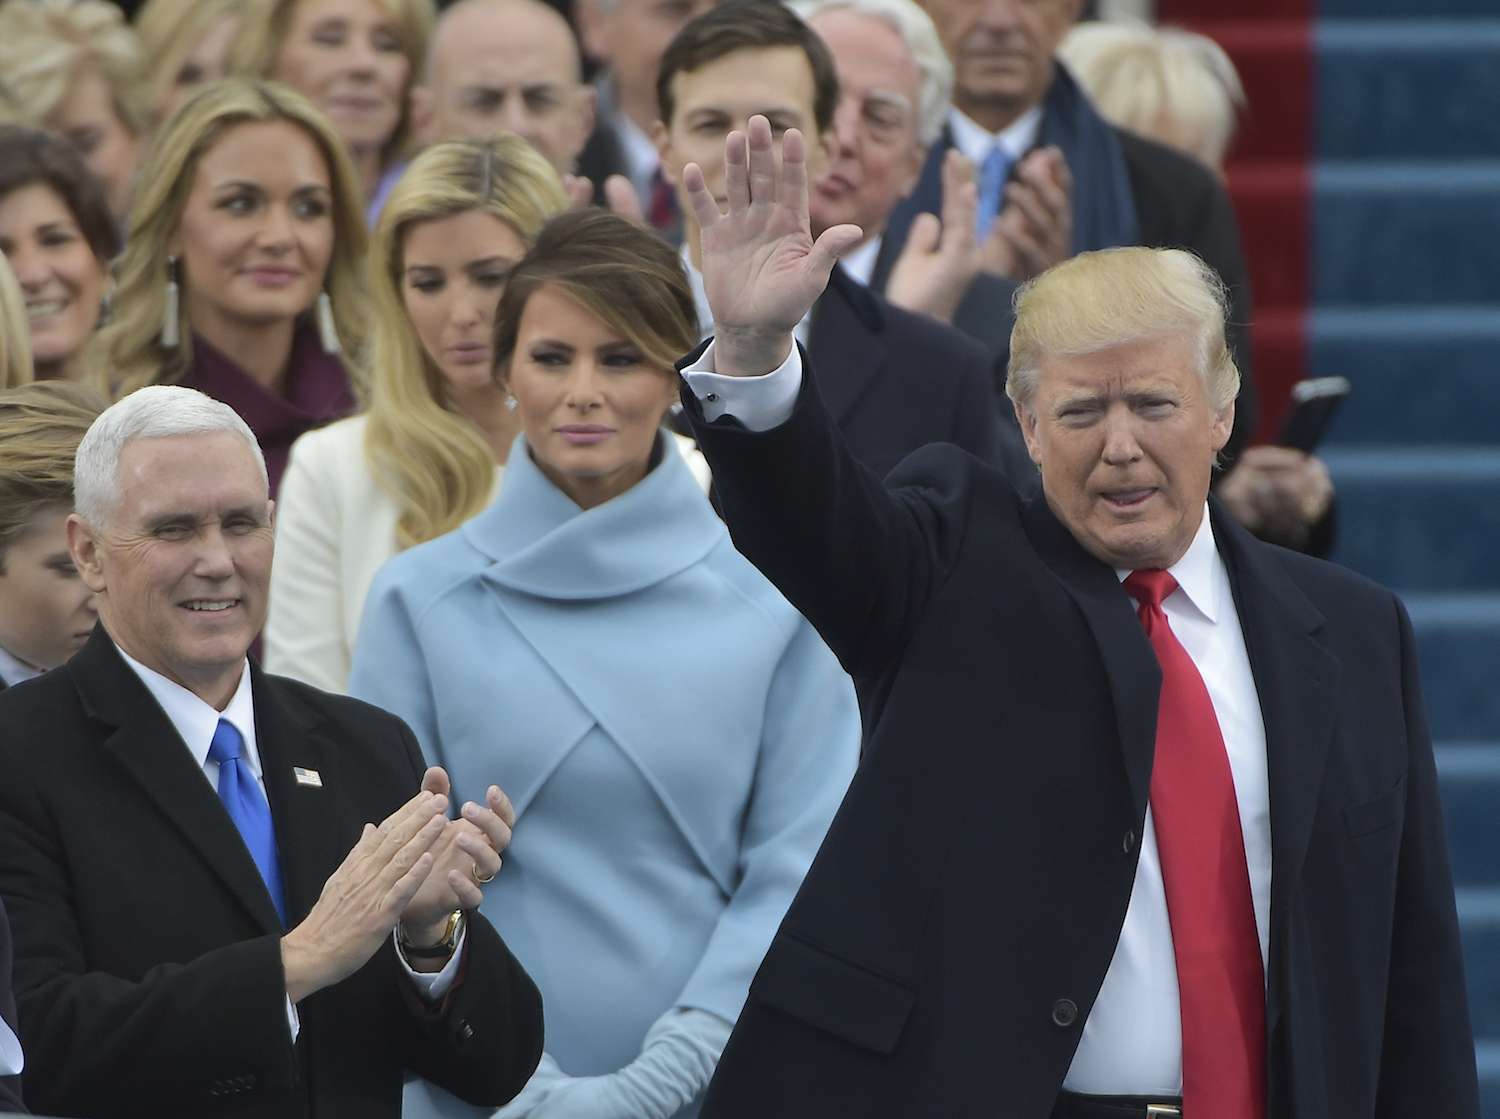 Vice-president elect Mike Pence (L) applauds as President-elect Donald Trump waves to the crowd as he arrives on the platform at the US Capitol in Washington, DC, on January 20, 2017, before his swearing-in ceremony. / AFP PHOTO / Mandel NGAN